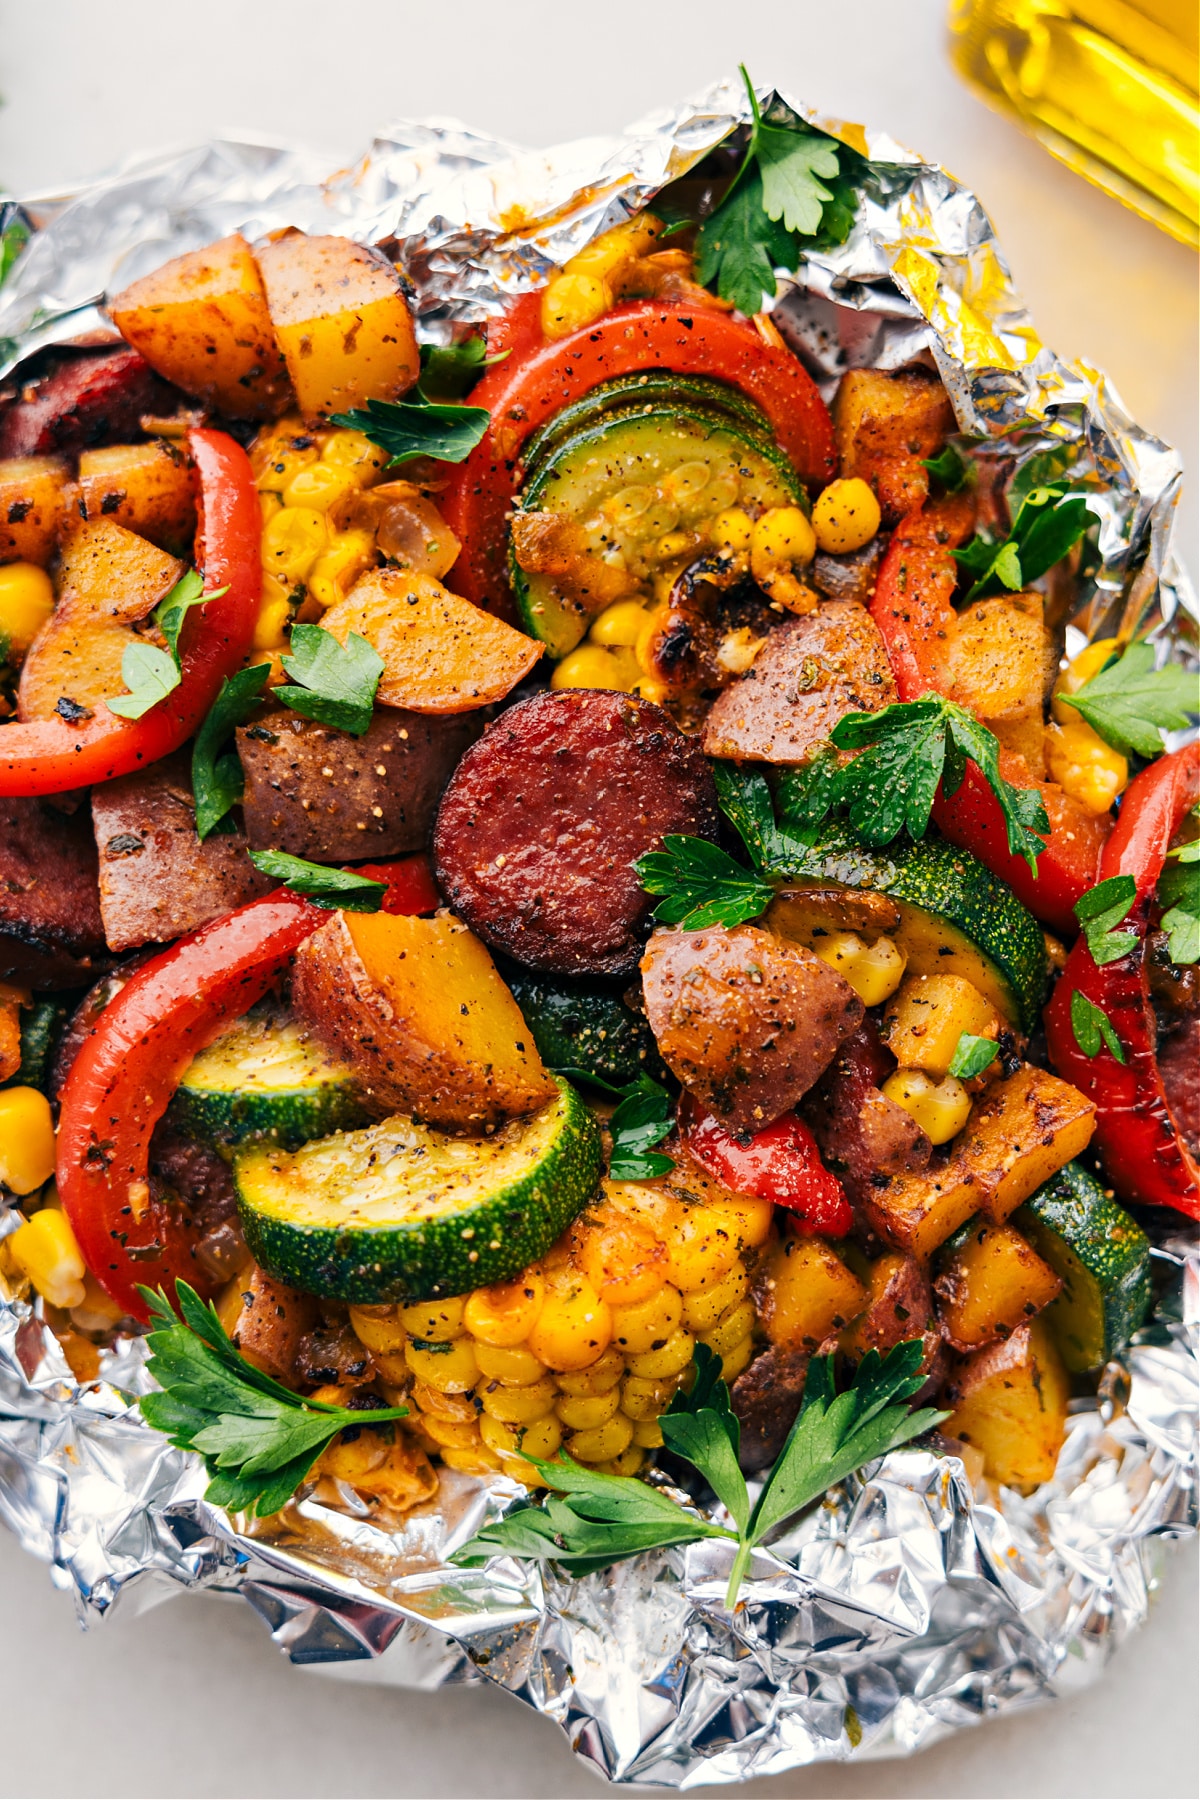 Tin Foil Sausage and Veggies Dinner ready to be eaten, the perfect camping or no mess meal.